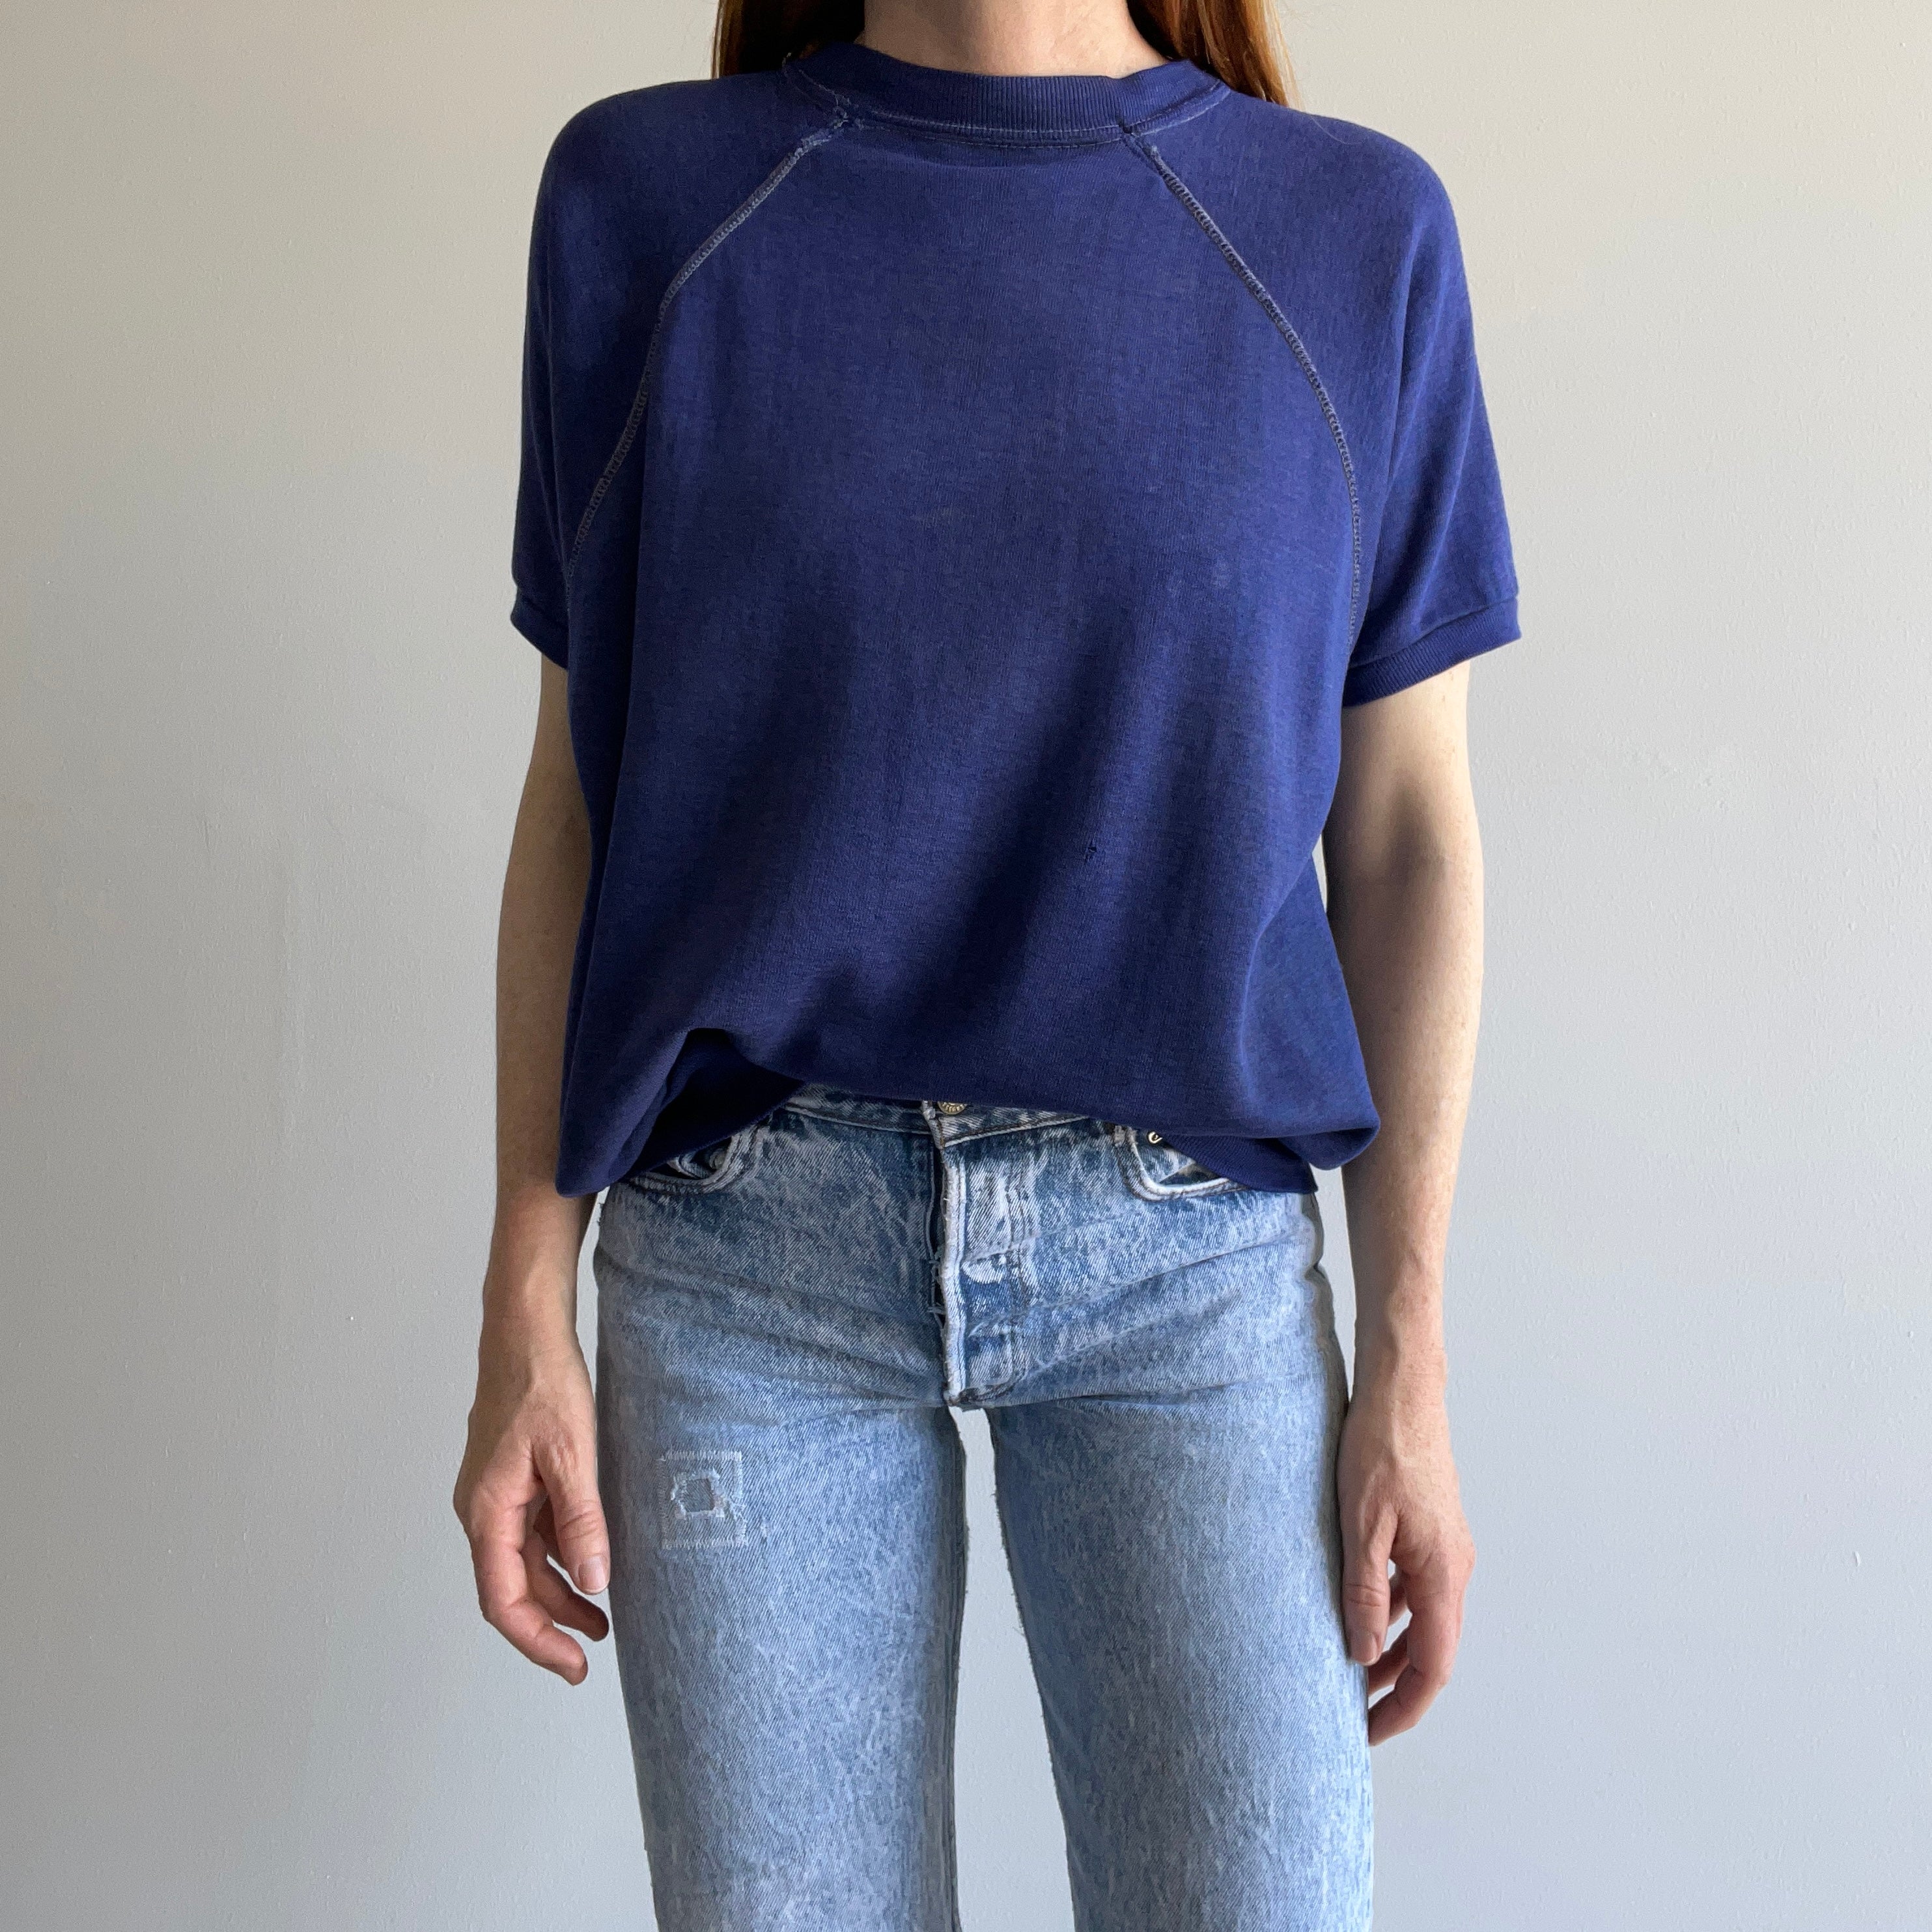 1970s Dumpster Chic Mended Navy Warm Up with Contrast Stitching and Patching - RAD